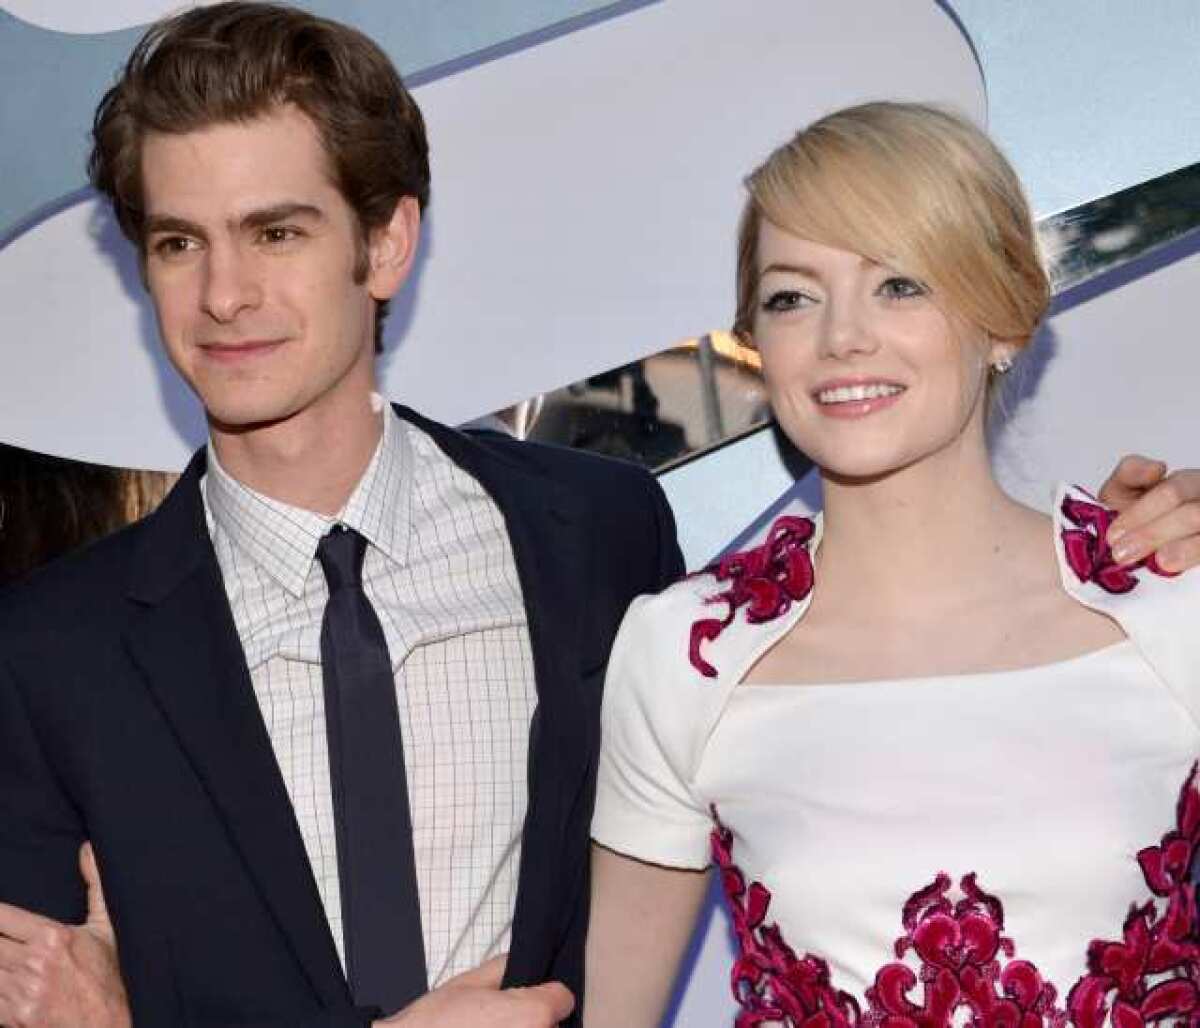 Actors Andrew Garfield and Emma Stone arrive at the premiere of Columbia Pictures' "The Amazing Spider-Man" at the Regency Village Theatre.